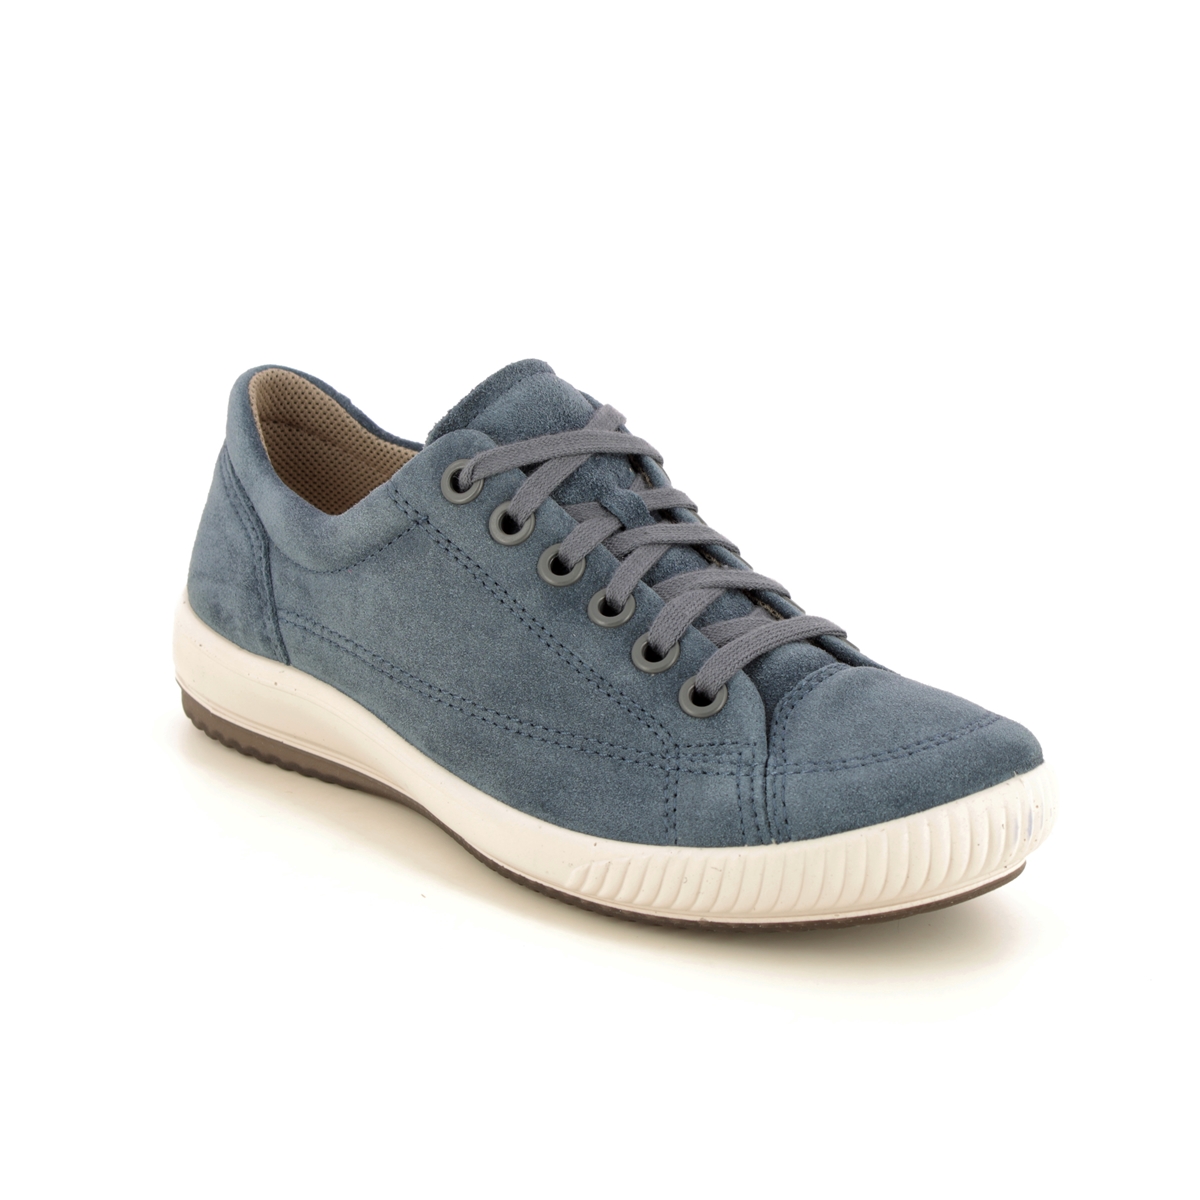 Legero Tanaro 5 Stitch Blue Suede Womens Lacing Shoes 2000161-8600 In Size 8 In Plain Blue Suede